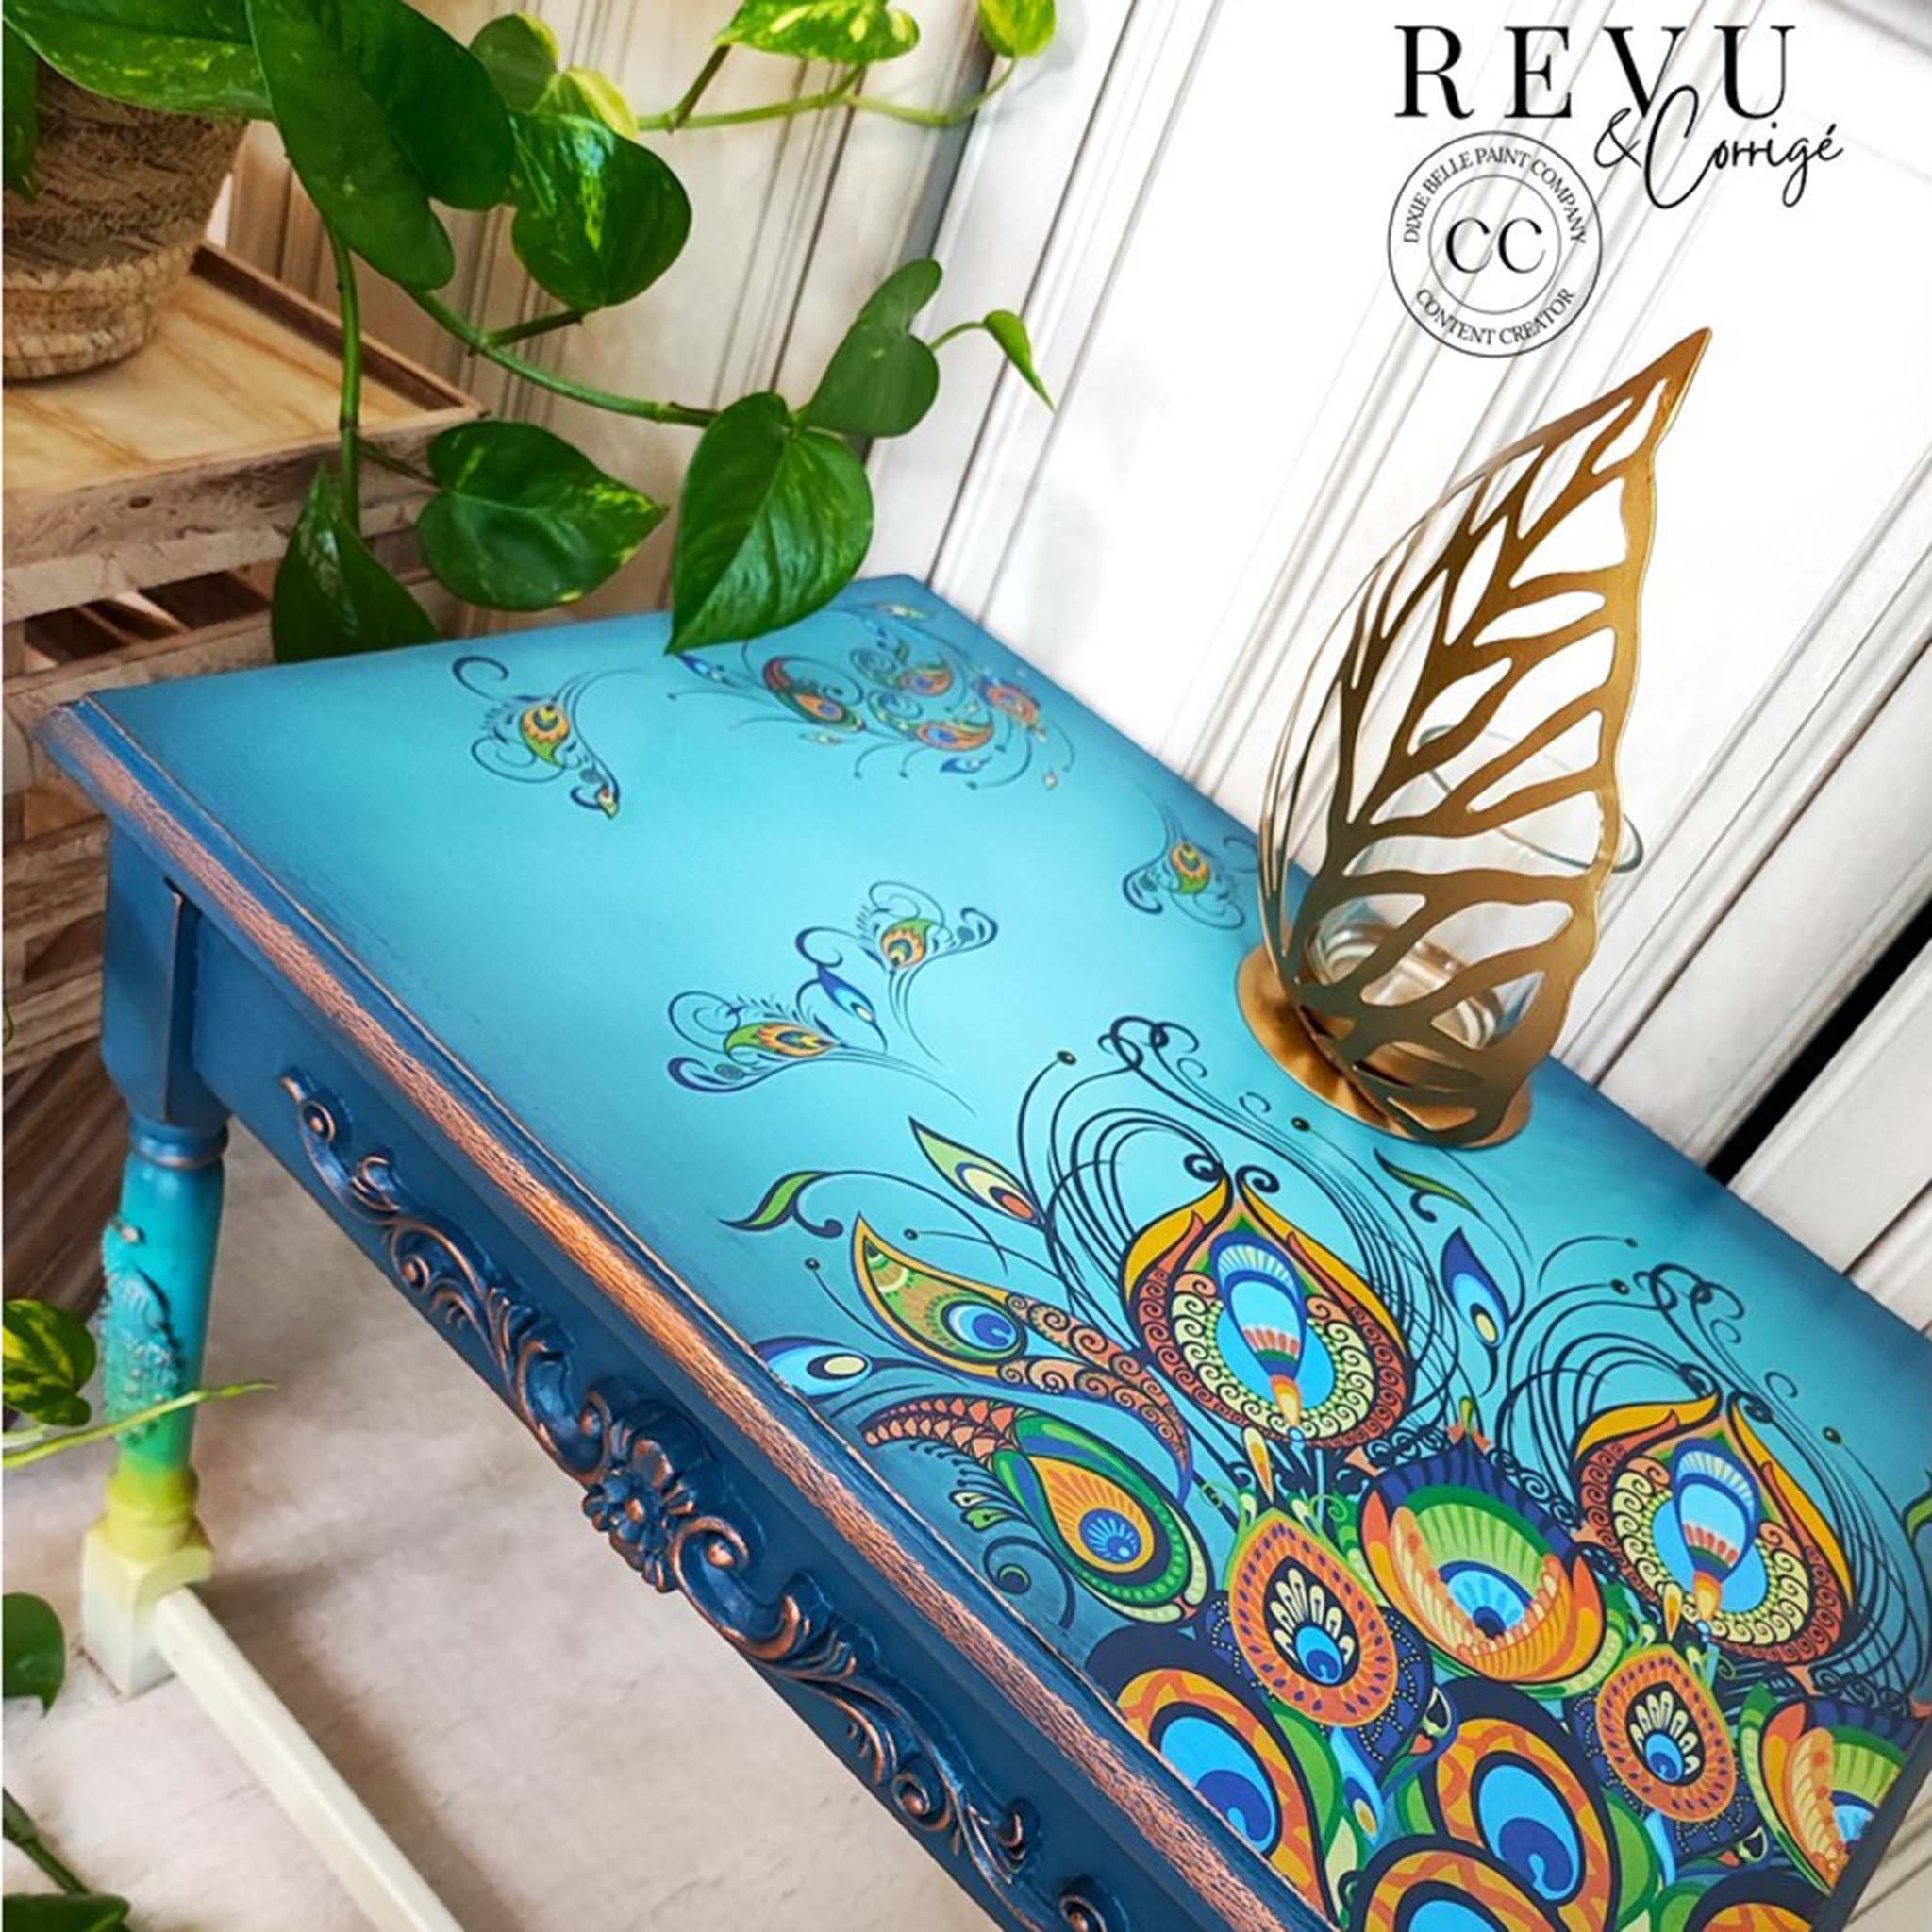 A vintage table refurbished by Revu & Corrigé, a Dixie Belle Paint Company Content Creator, is painted a blend of bright blues and features the Retro Peacock transfer on the top.